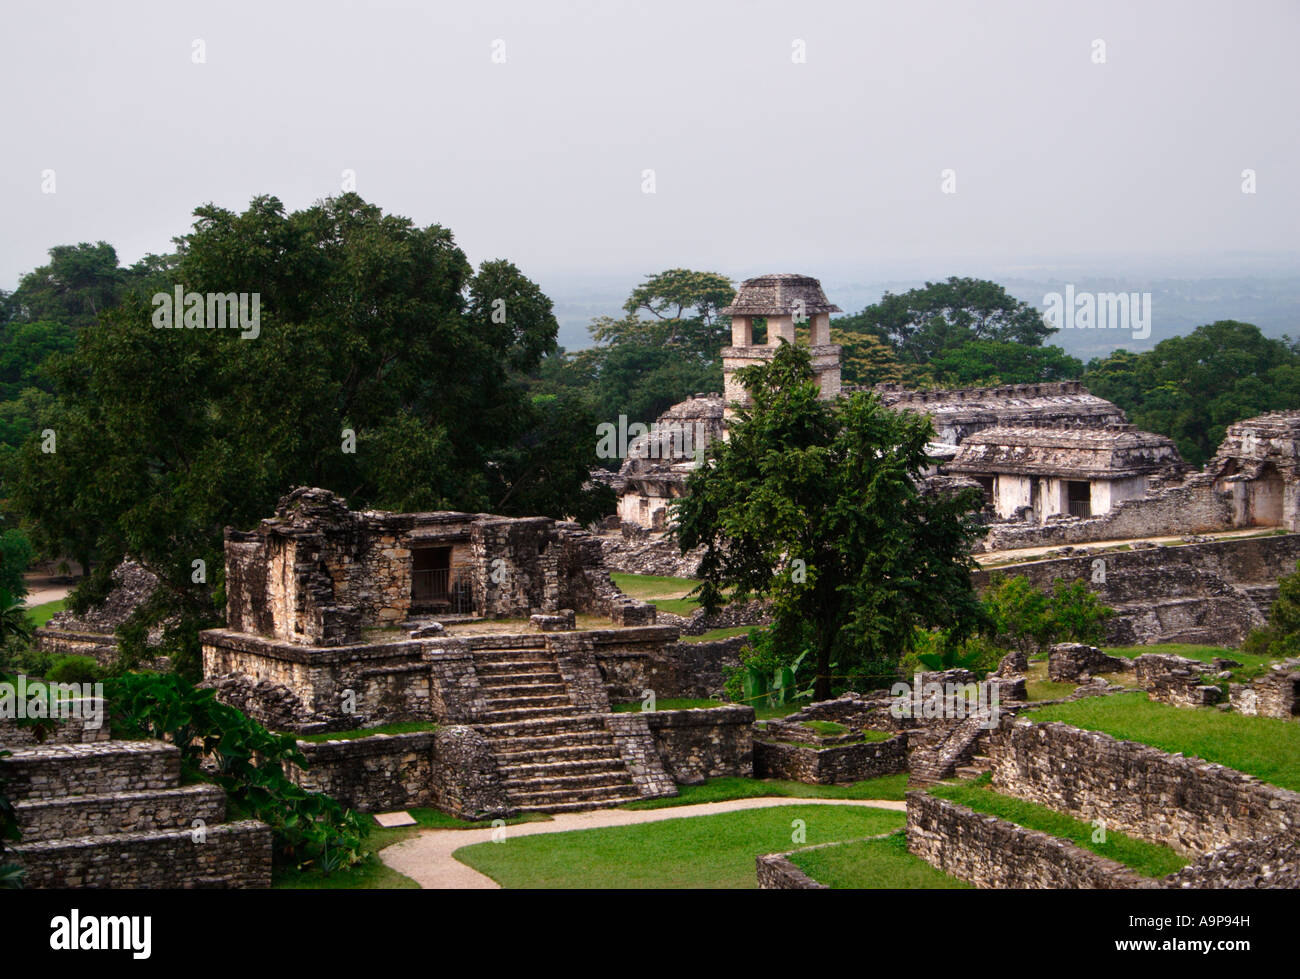 The Palace, Palenque, Mayan archaeological ruin site, Chiapas, Mexico Stock Photo